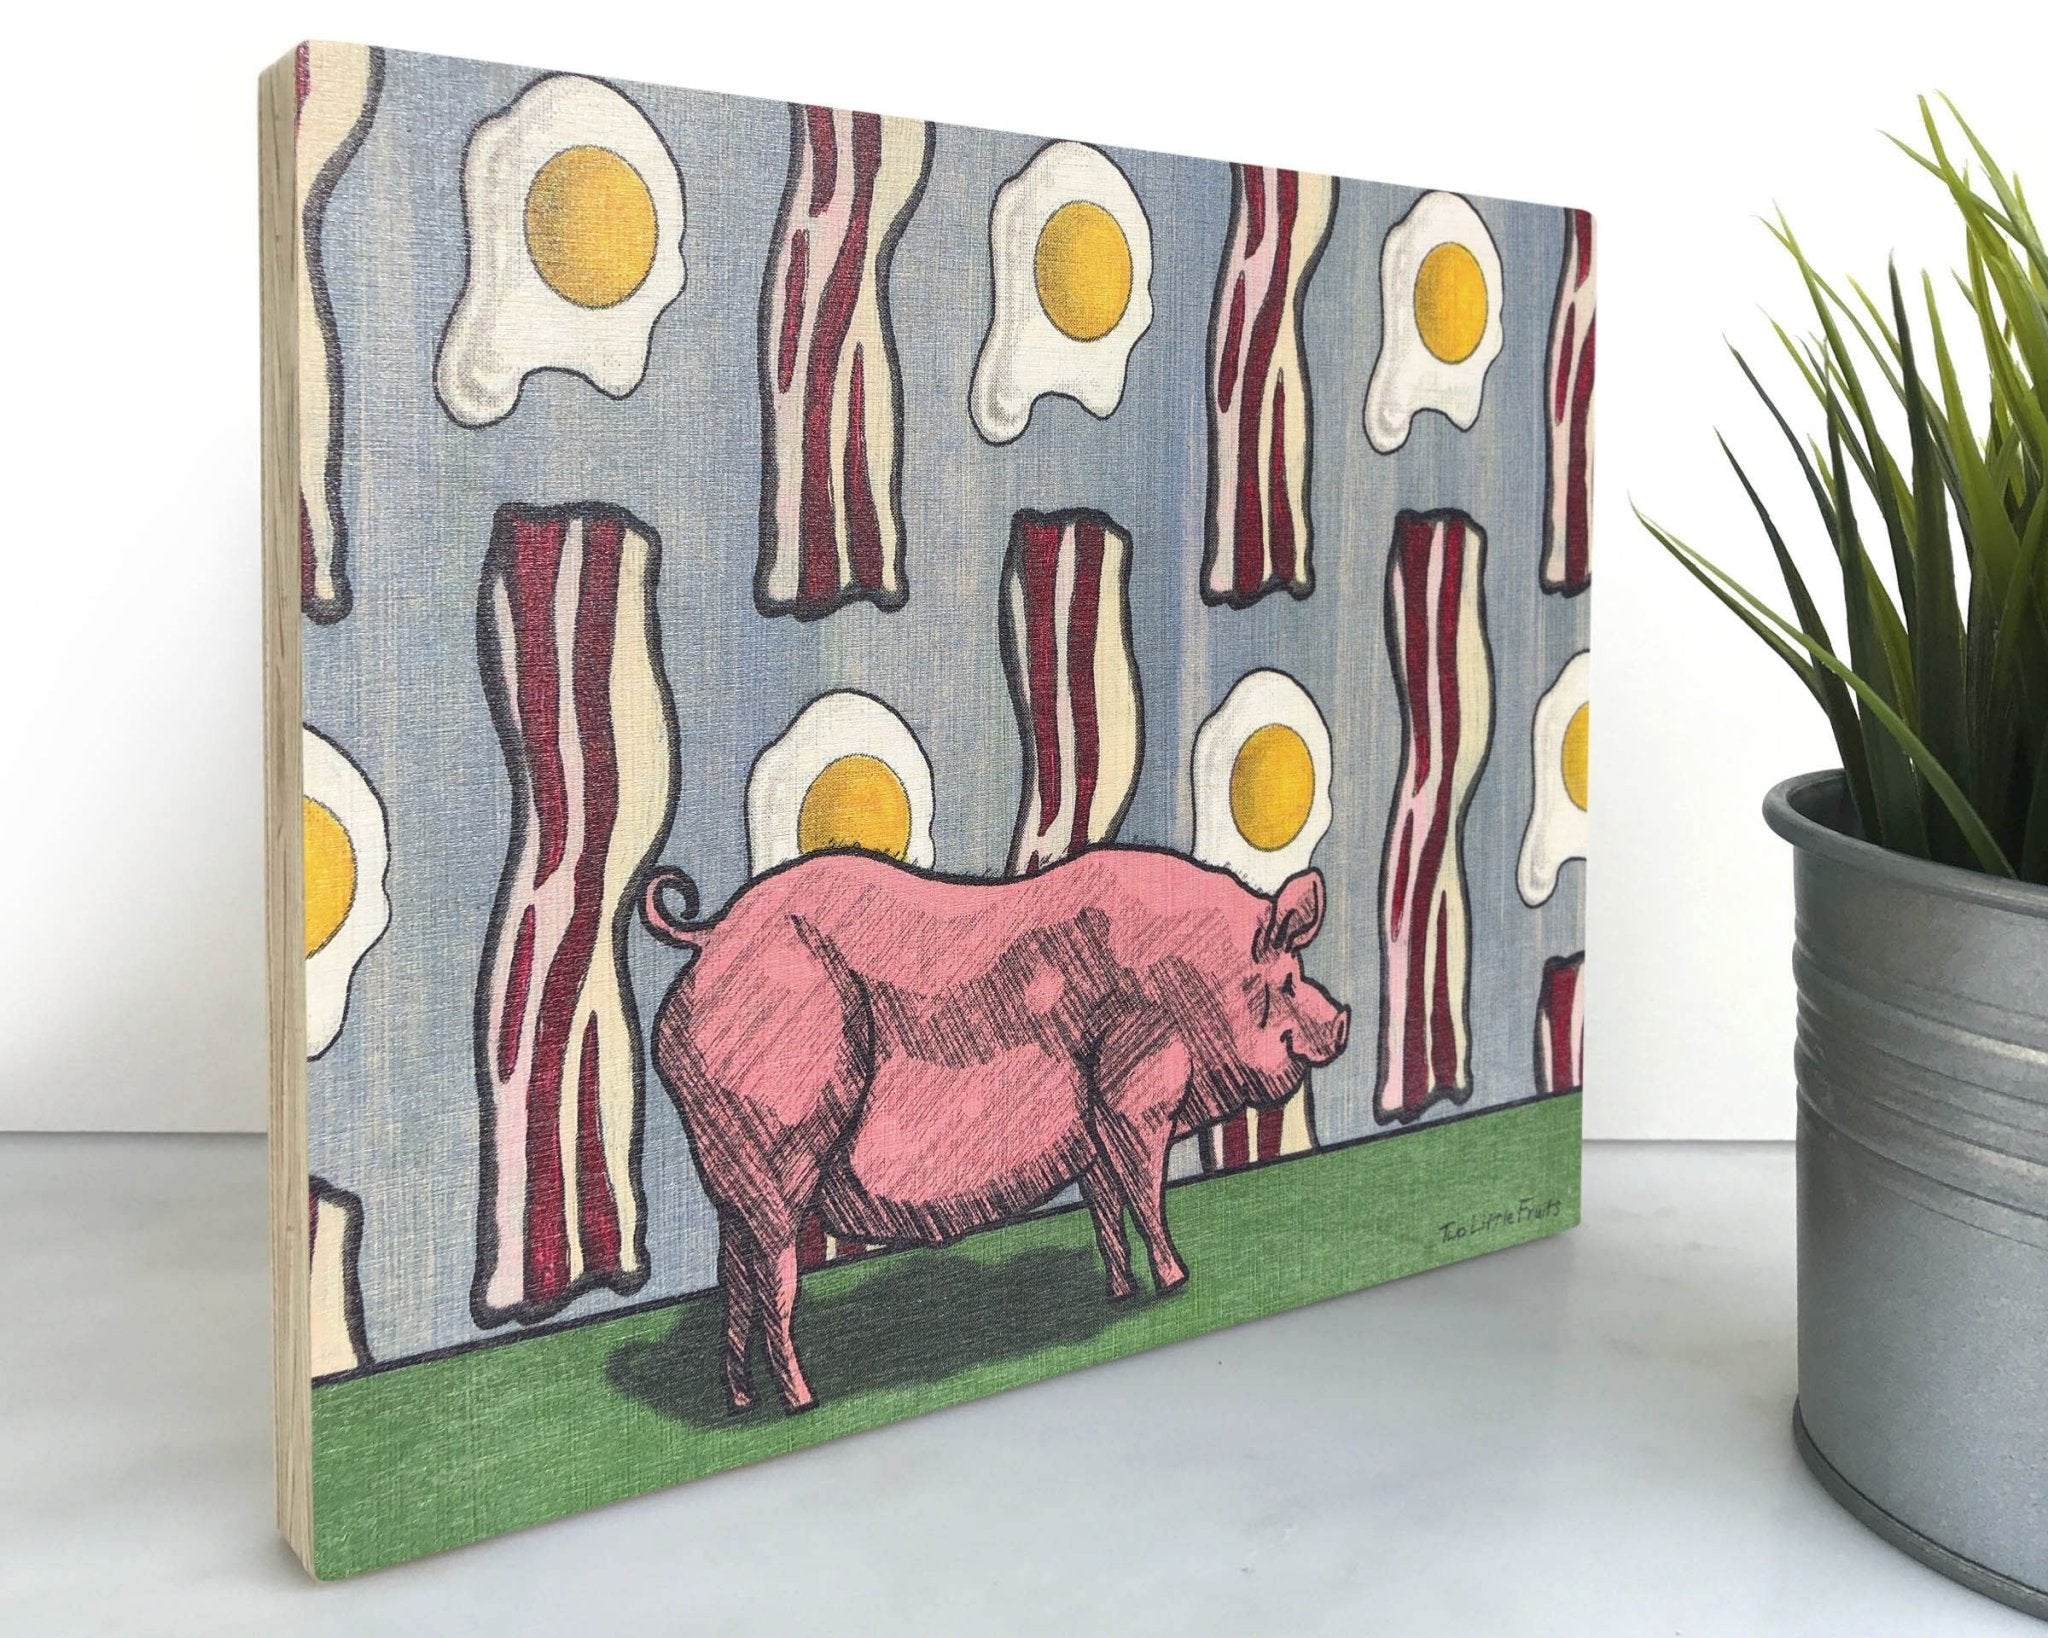 Pig and Bacon 8x10 Wood Art Block - Art On Wood - Two Little Fruits - Two Little Fruits